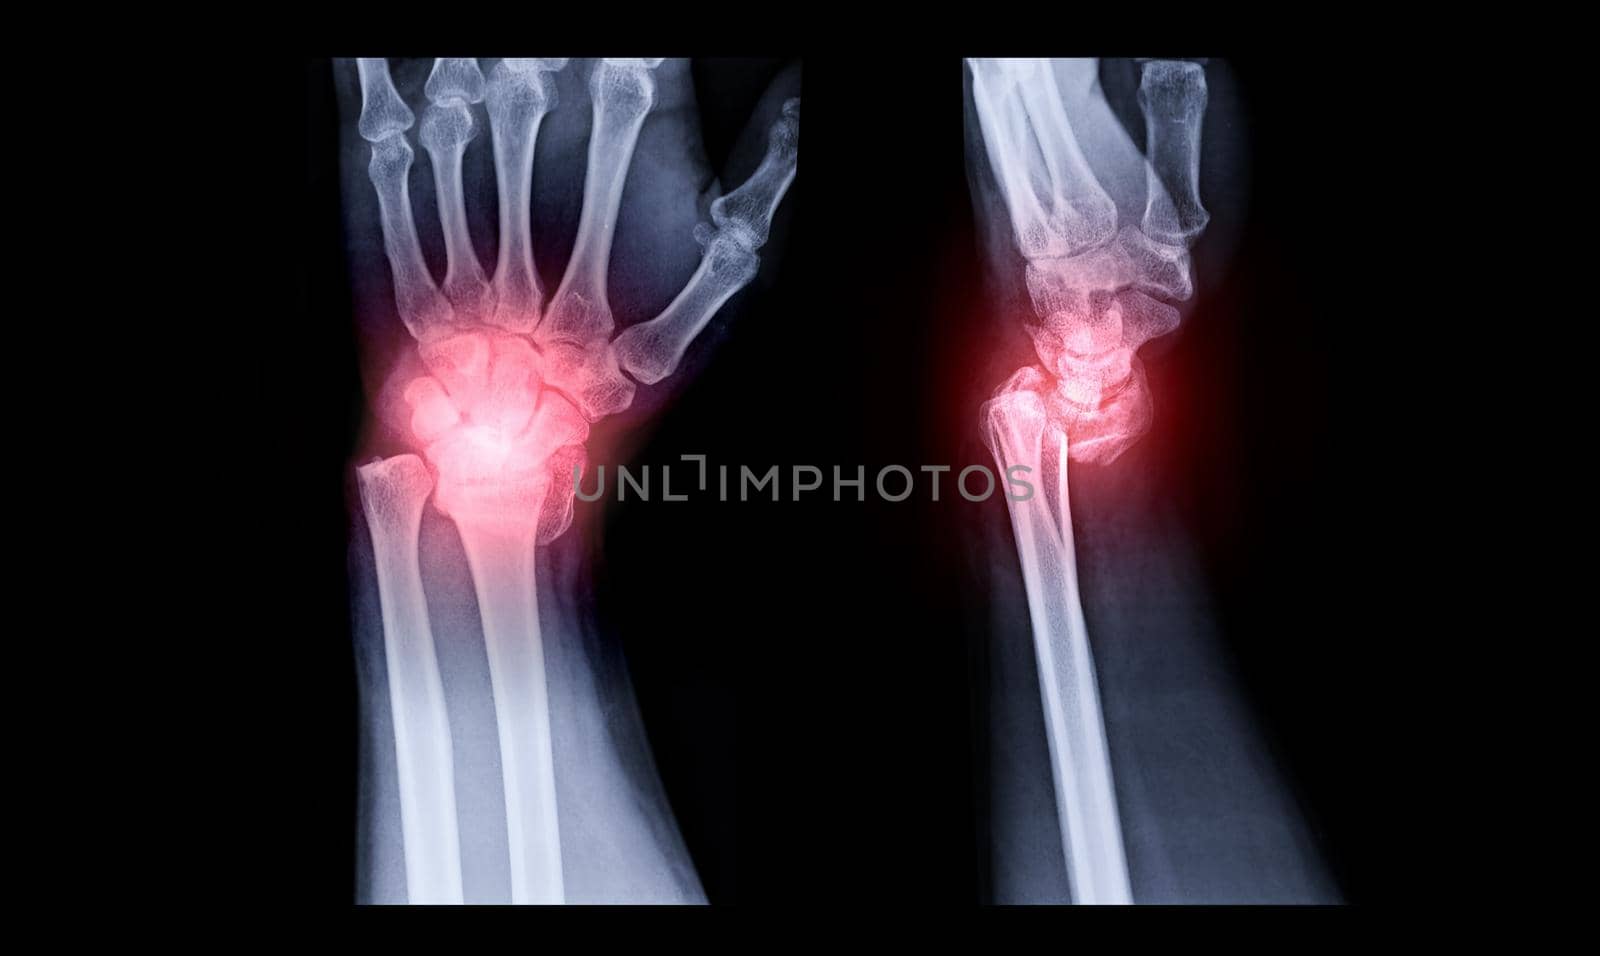 X-ray image of Left wrist joint AP and Lateral view for showing fracture of radius bone.